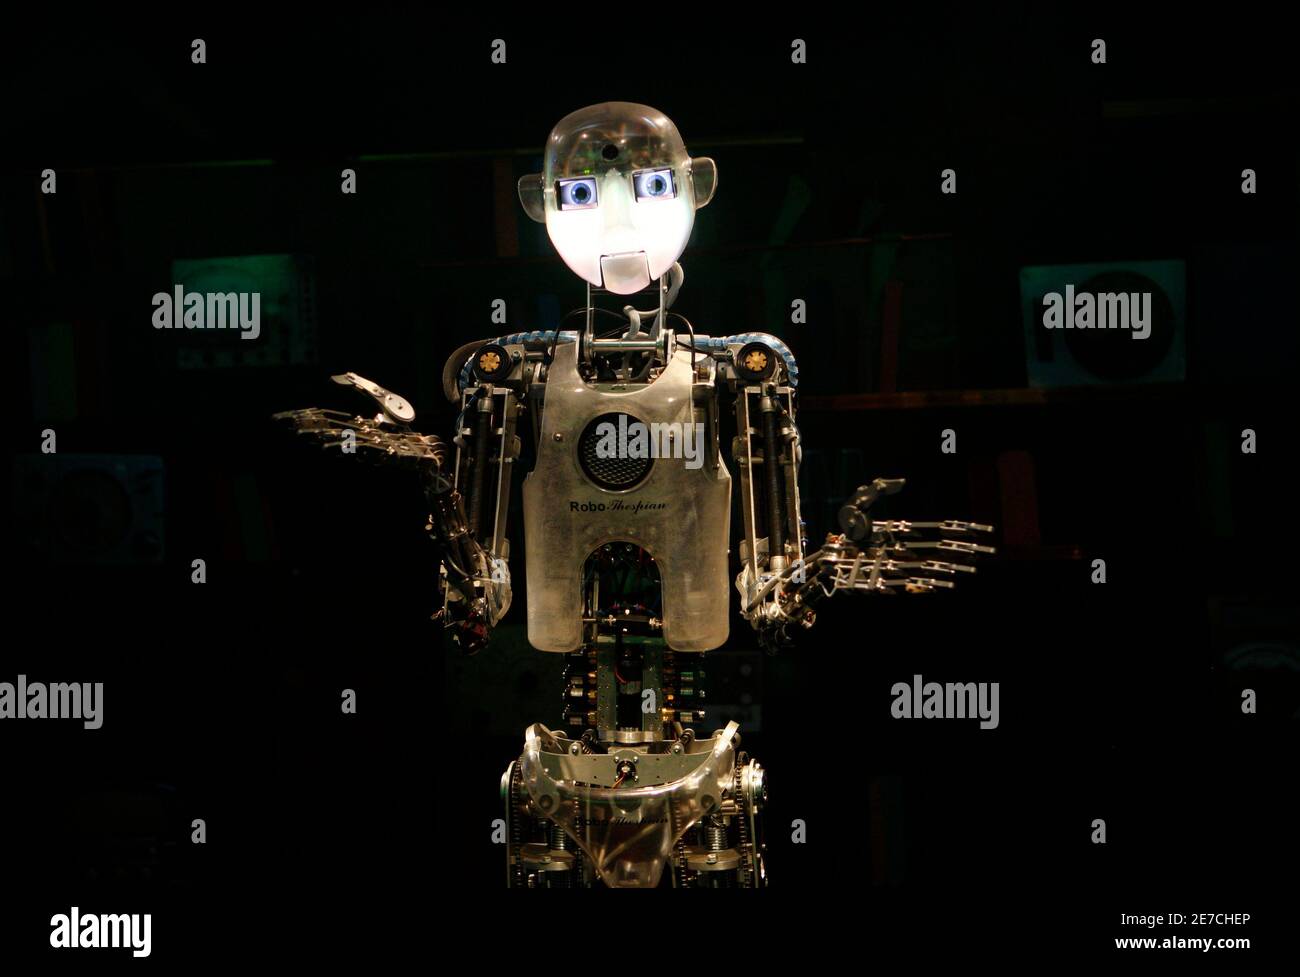 Thespian, a humanoid robot, communicates with the audience through a user's interface at the Robotic World exhibition at Madatech, the Israel National Museum of Science, in the northern city of Haifa July 8, 2010. REUTERS/Baz Ratner (ISRAEL - Tags: SOCIETY SCI TECH) Stock Photo